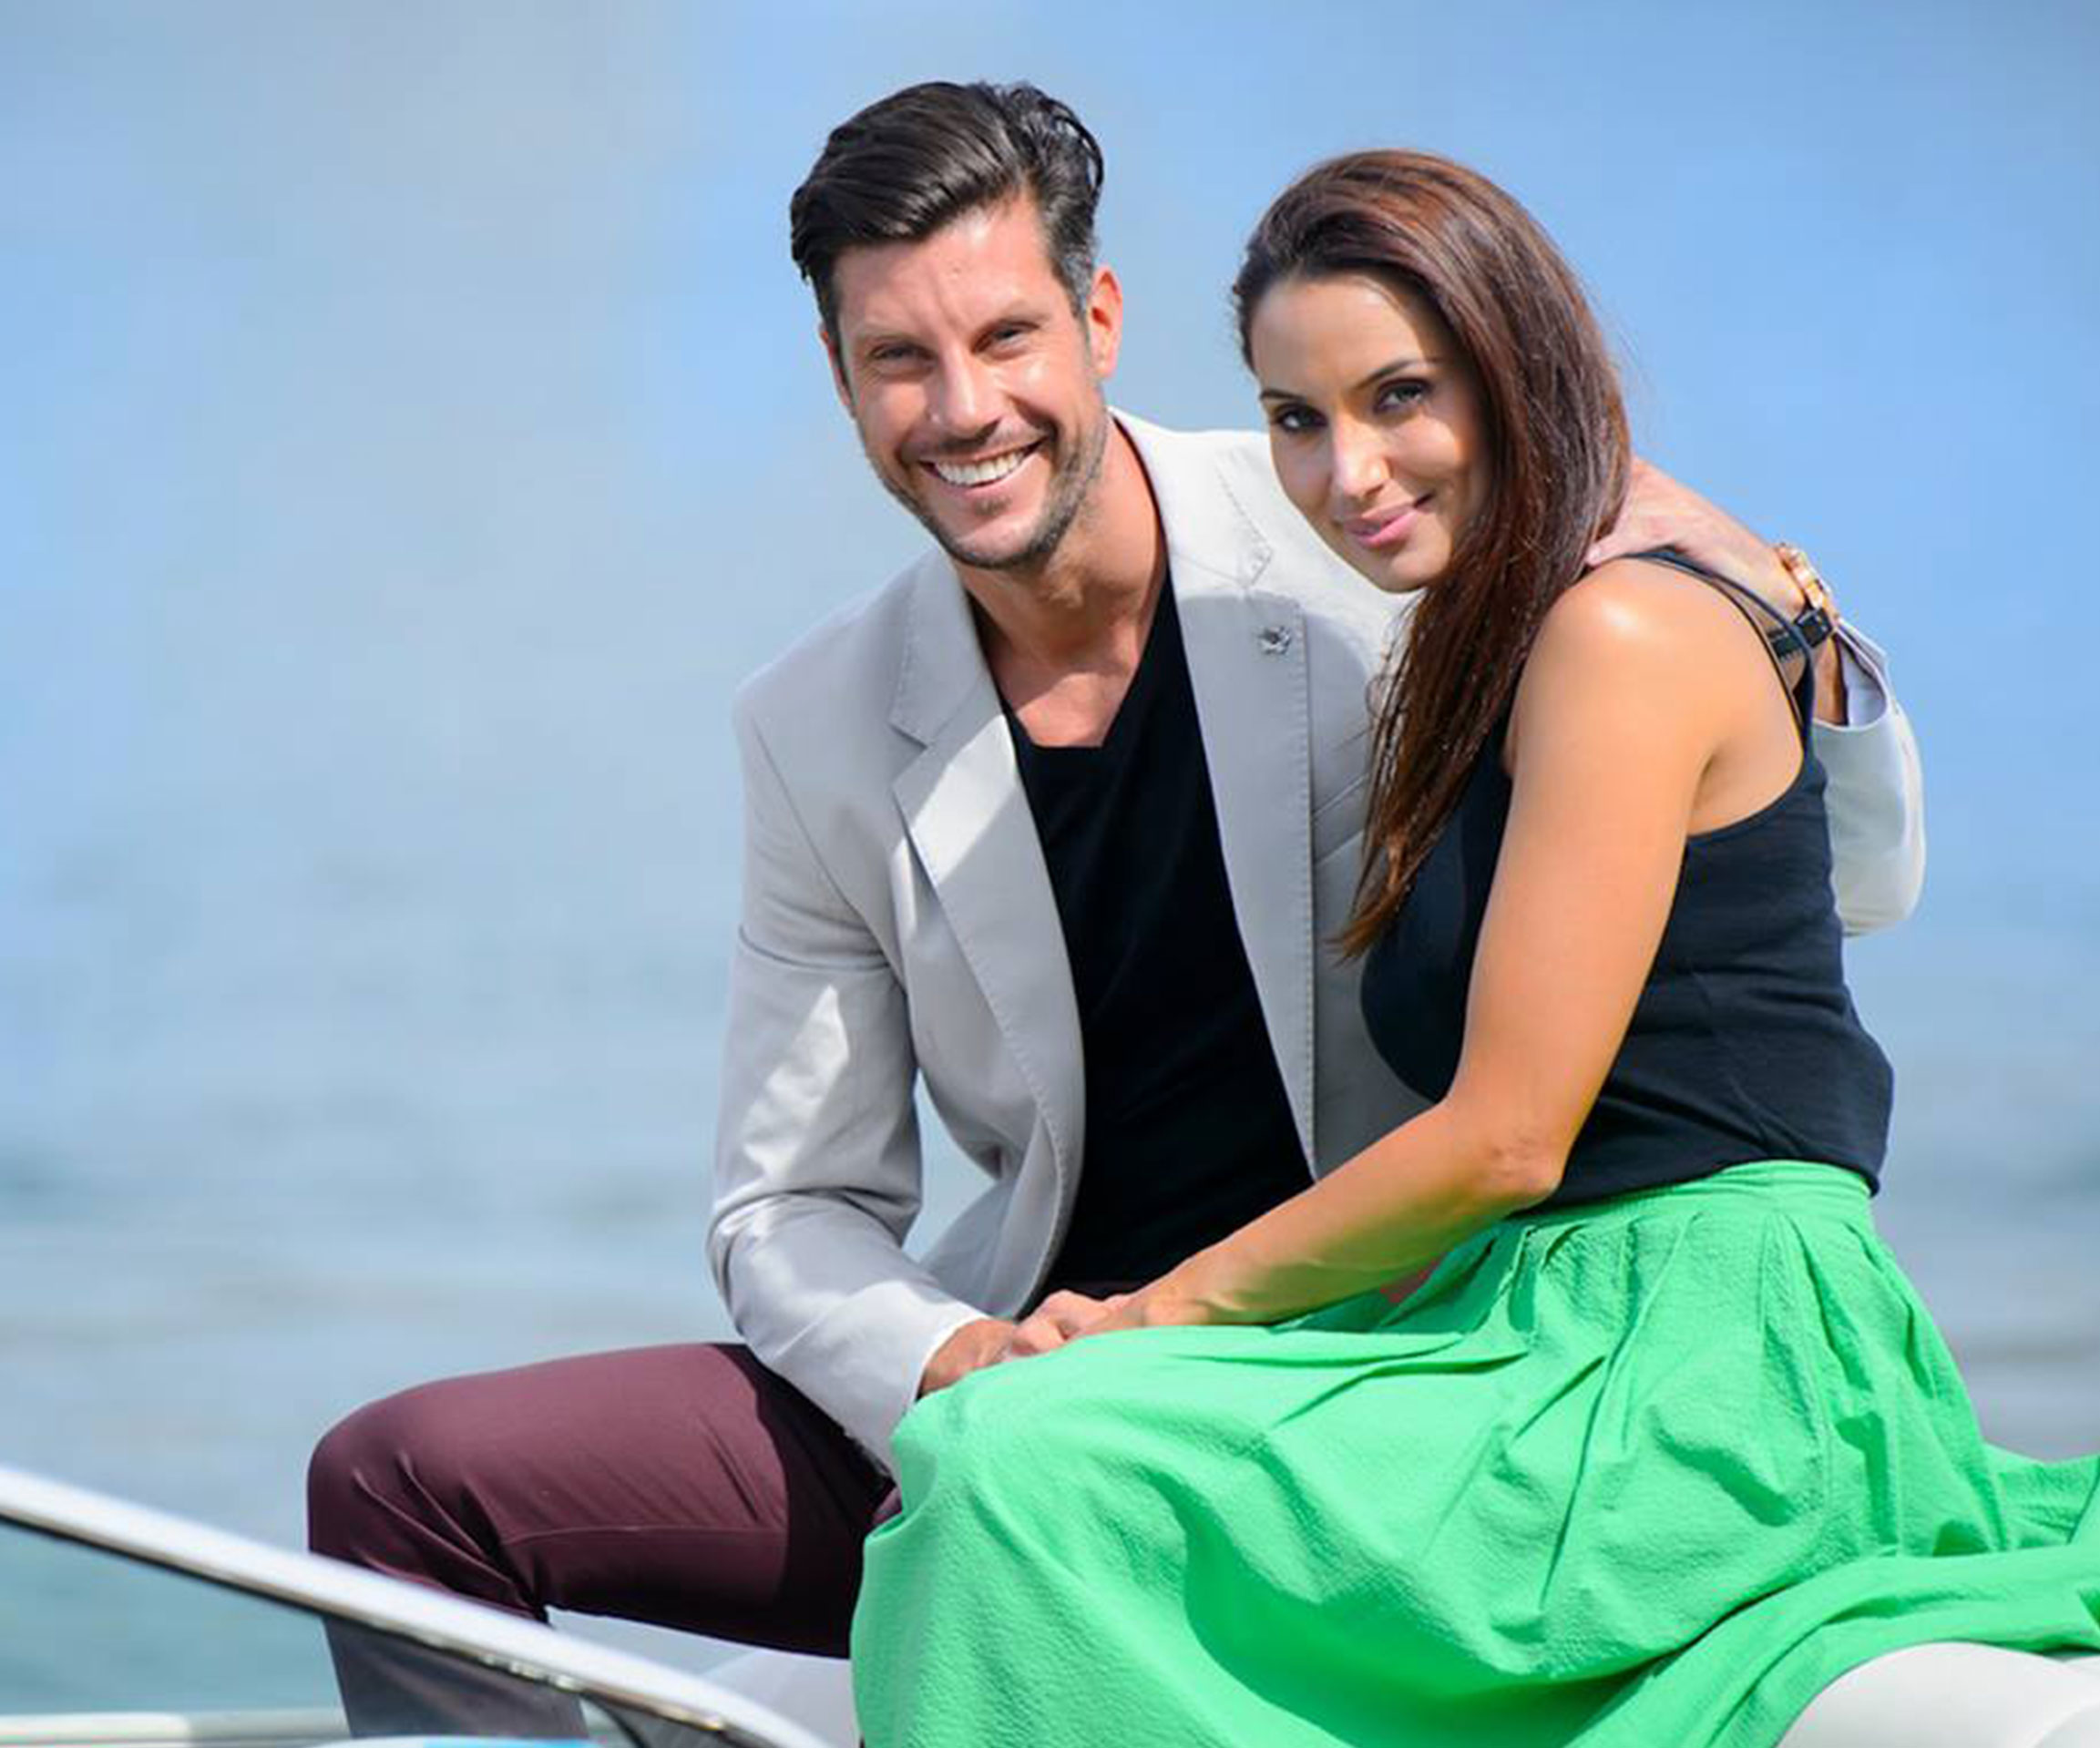 Did The Bachelor’s Sam and Snezana get married in secret?